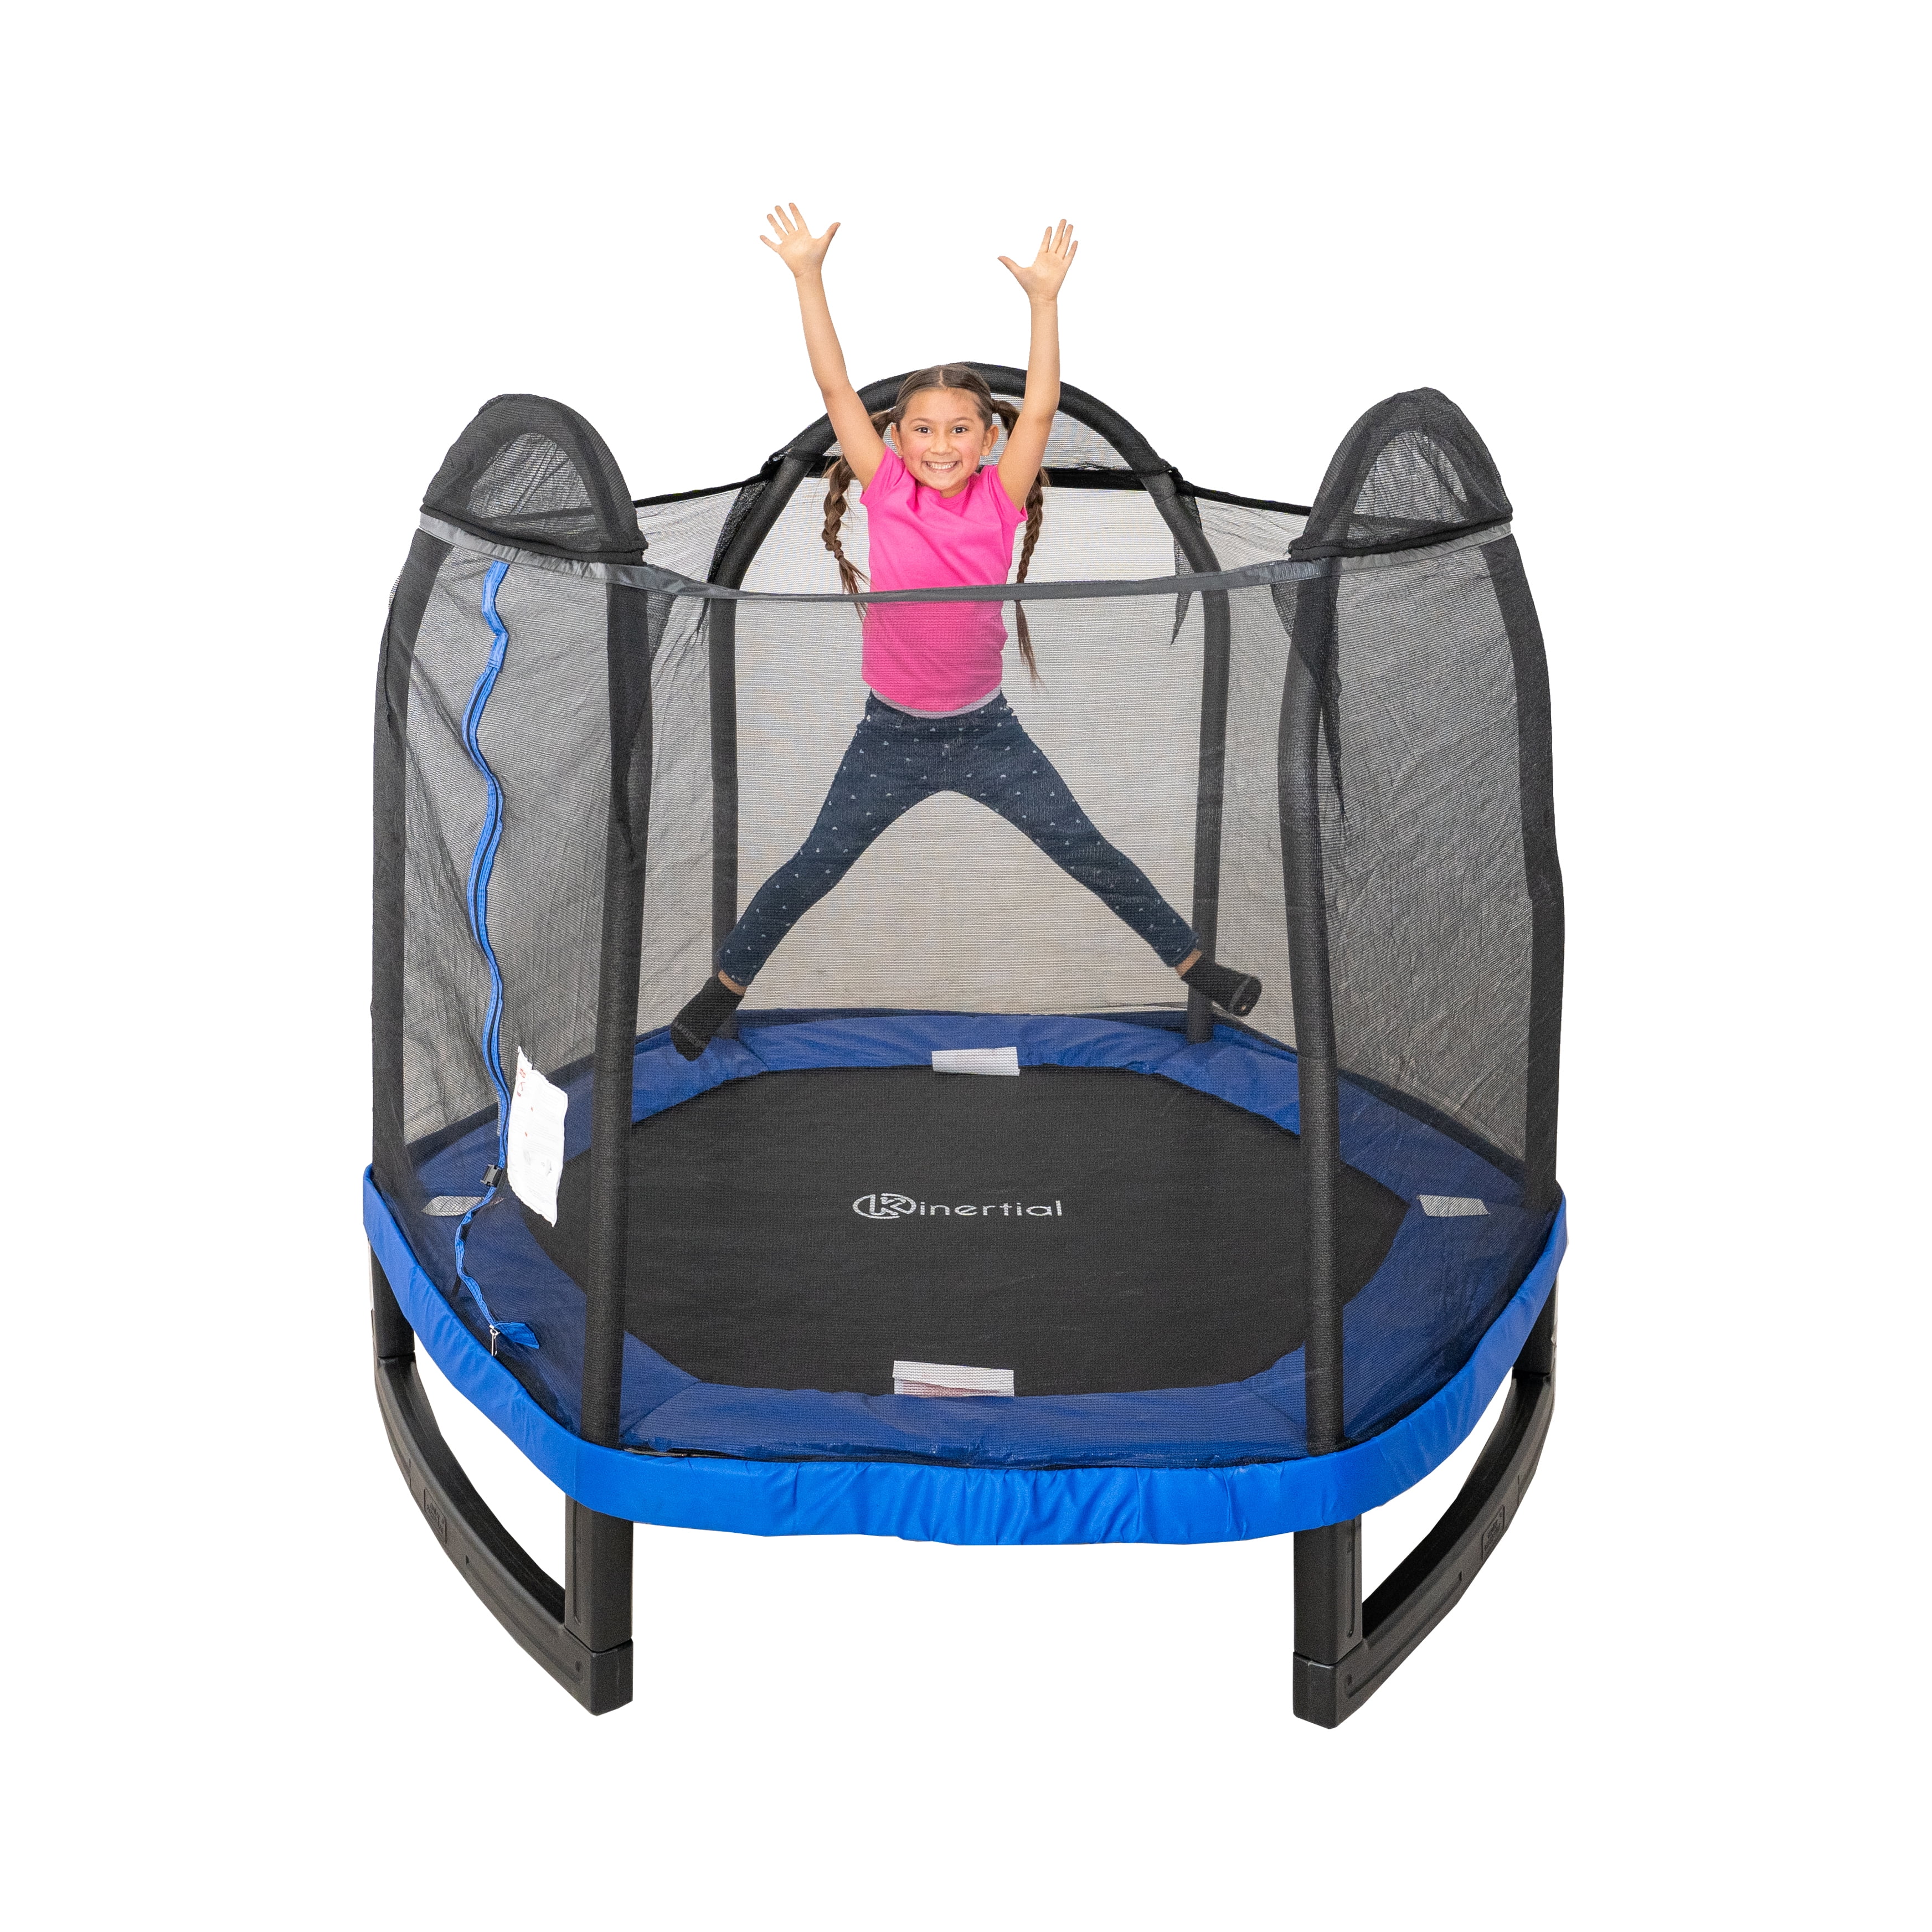 BOUNCERS Trampoline FOUND PHOTOGRAPH Color FREE SHIPPING Original  94 13 T 